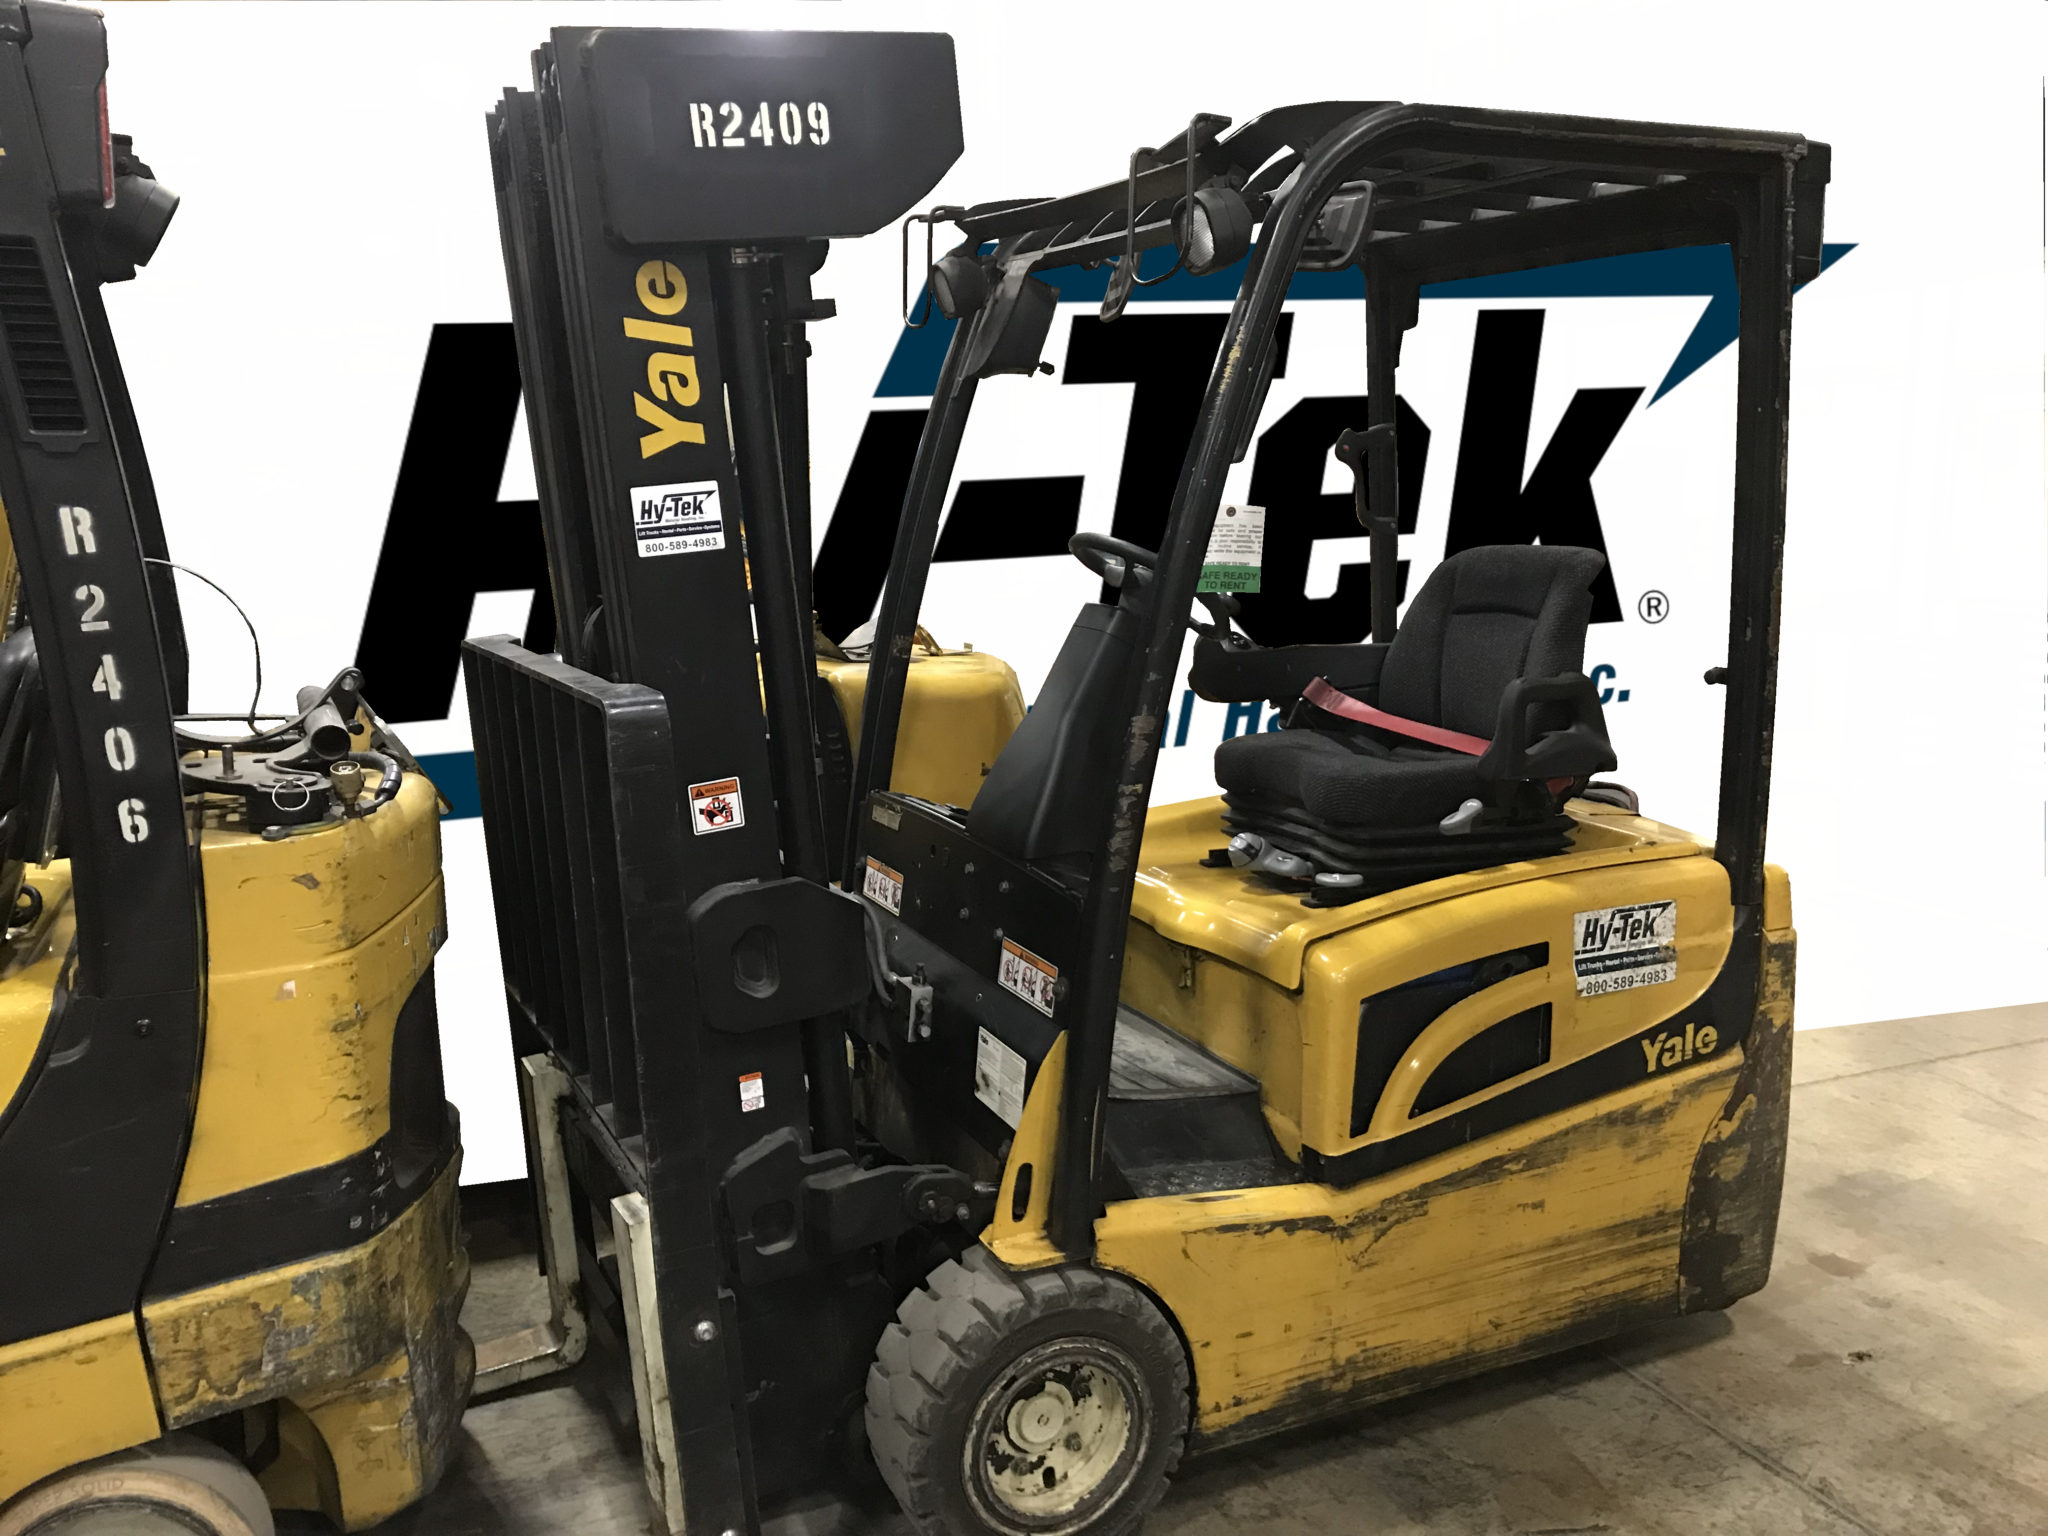 2012 Yale Erp040vt Used Forklifts Near Me